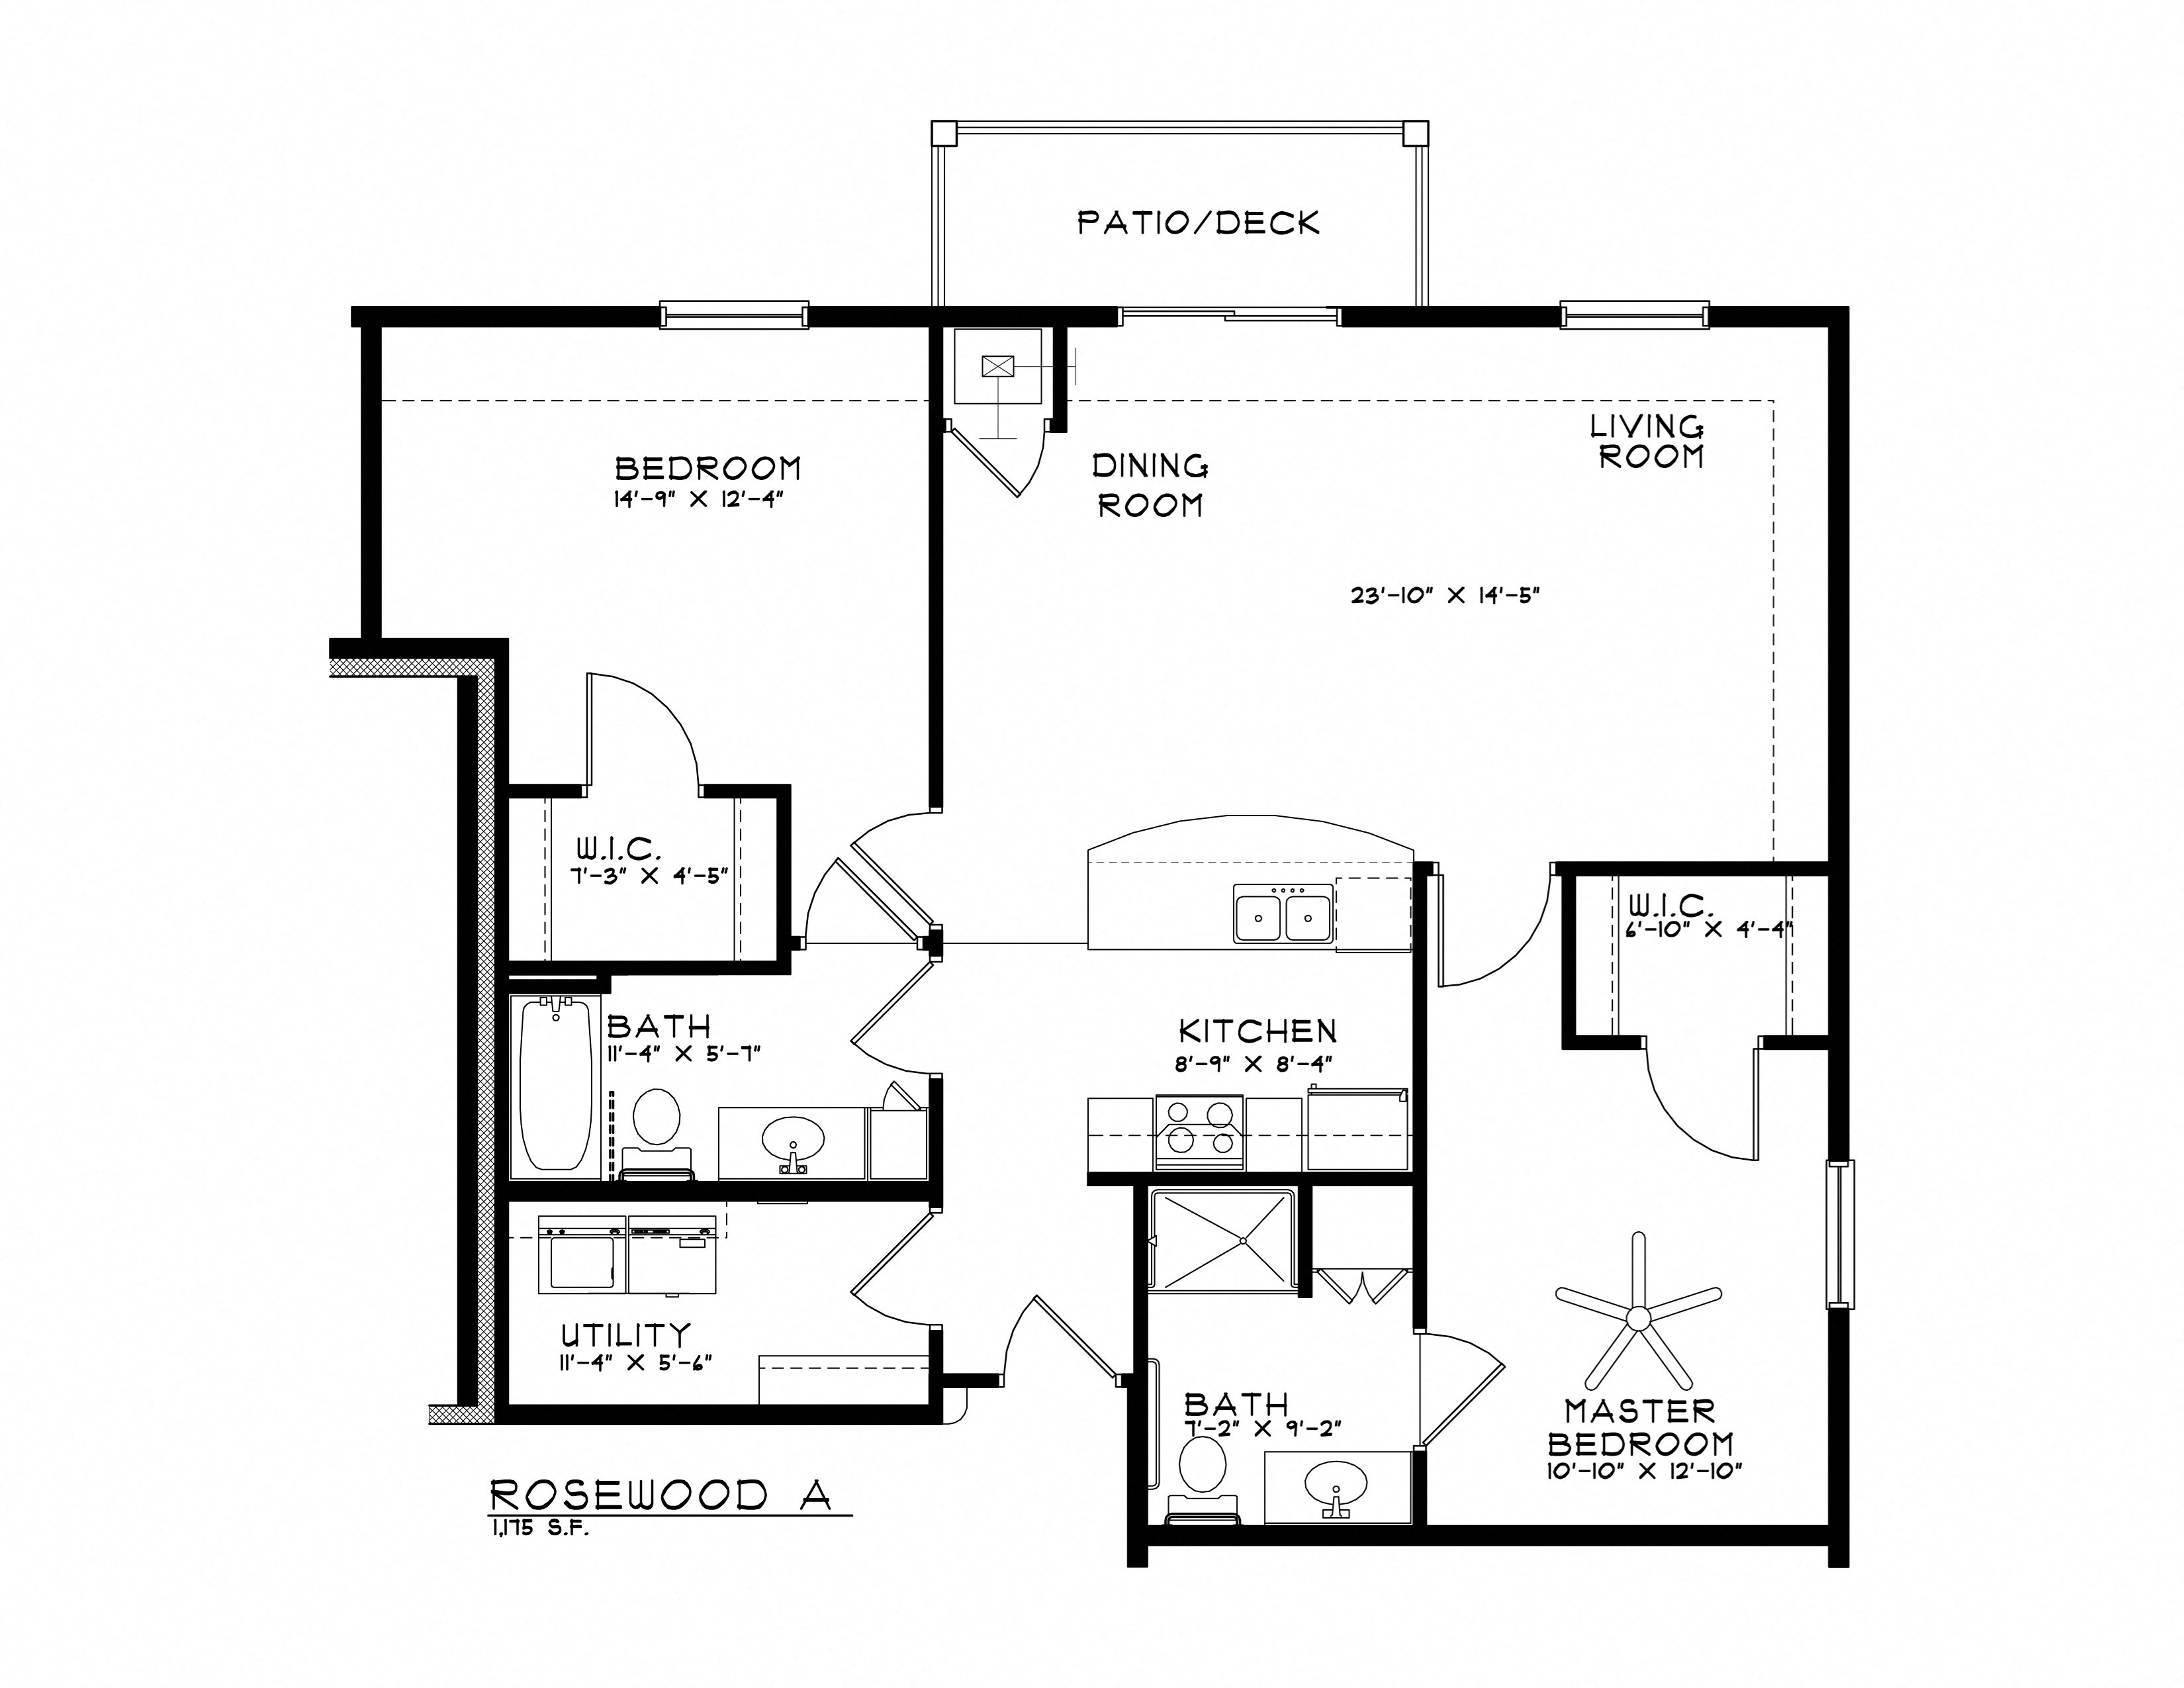 Floor Plans of The Estates at Arbor Oaks in Andover, MN